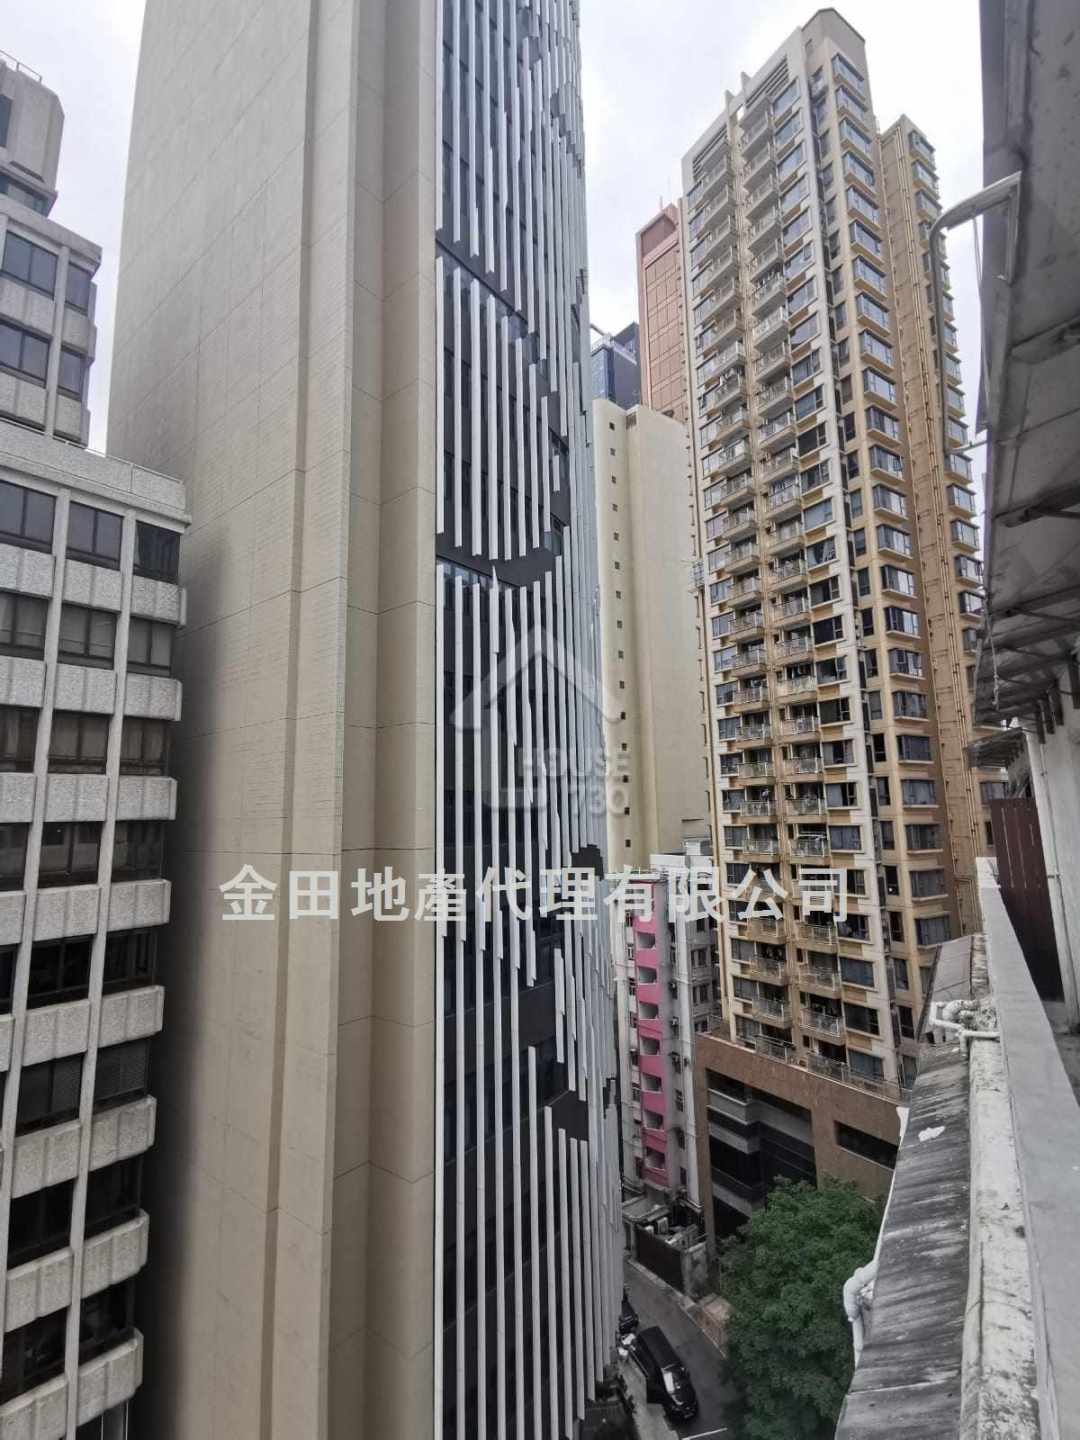 Wan Chai SUN TAO BUILDING Upper Floor View from Living Room House730-6282653